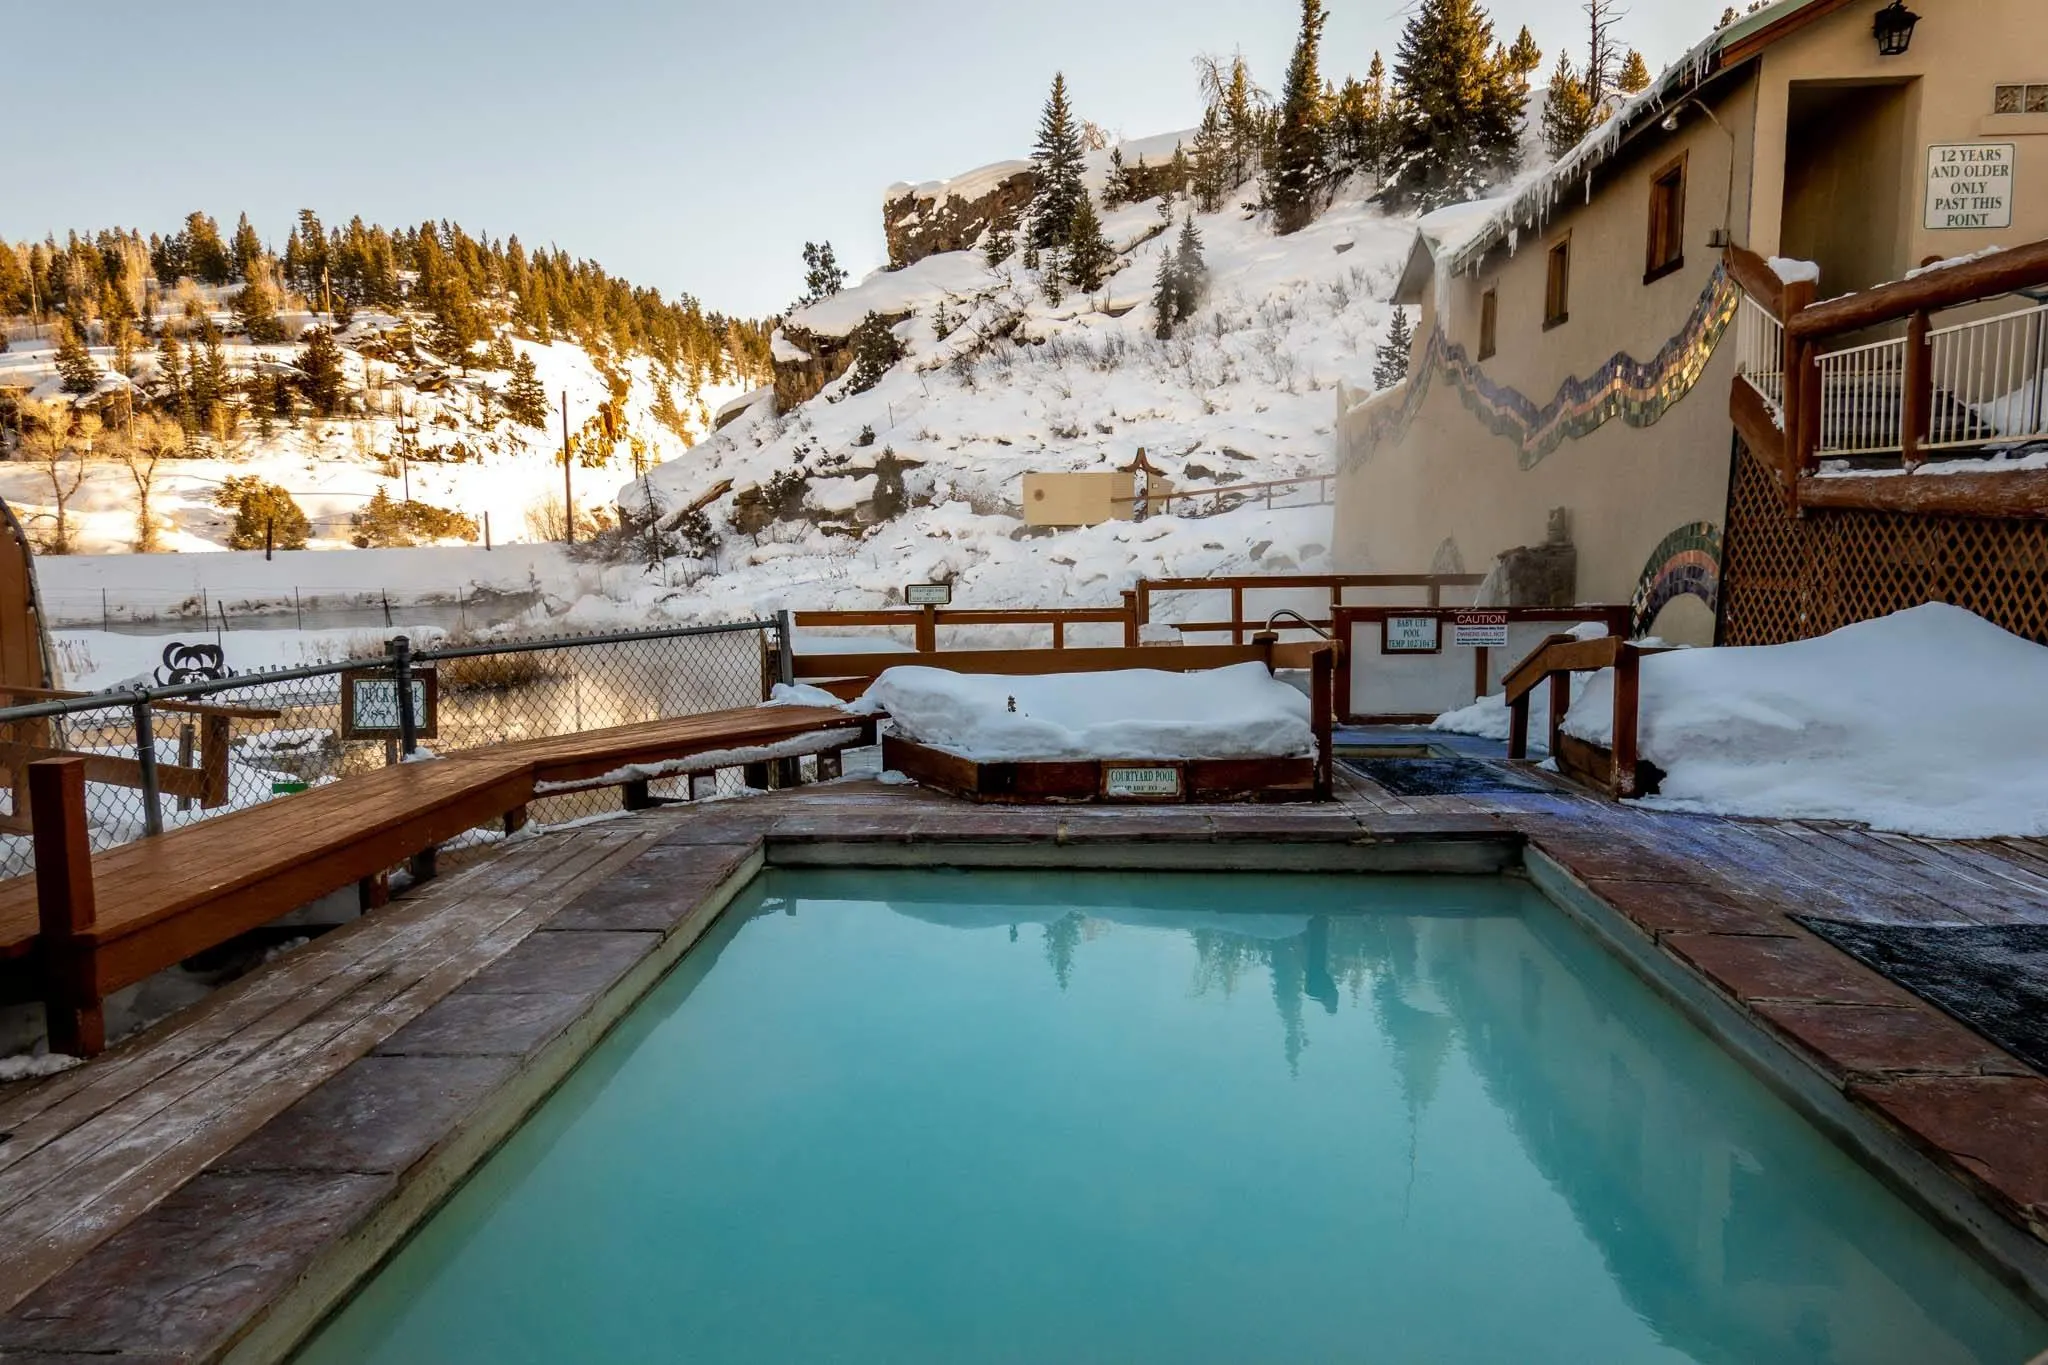 Outdoor pool in the winter with snow